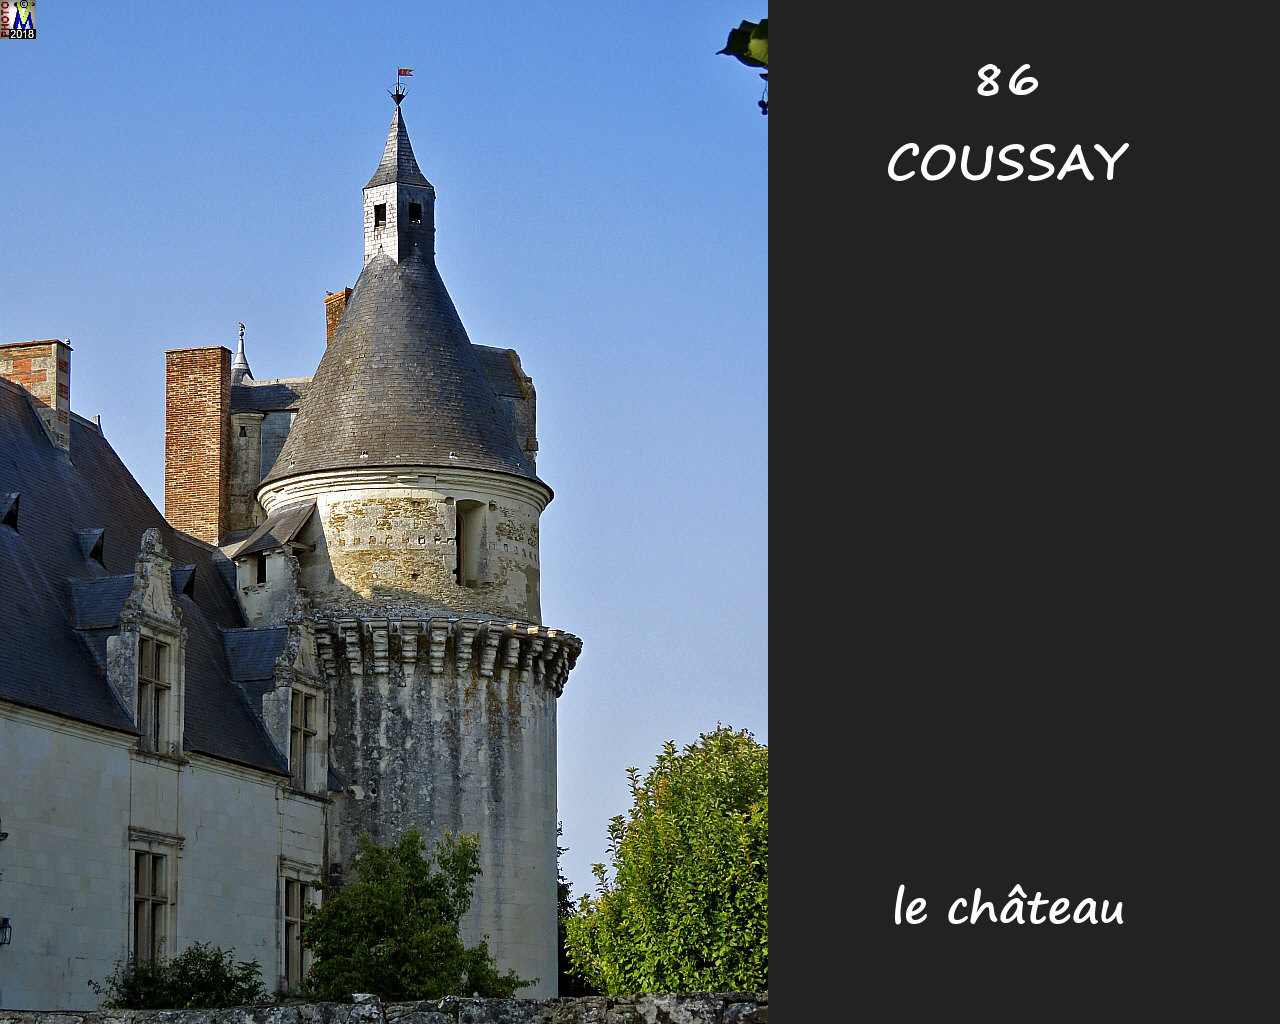 86COUSSAY_chateau_124.jpg